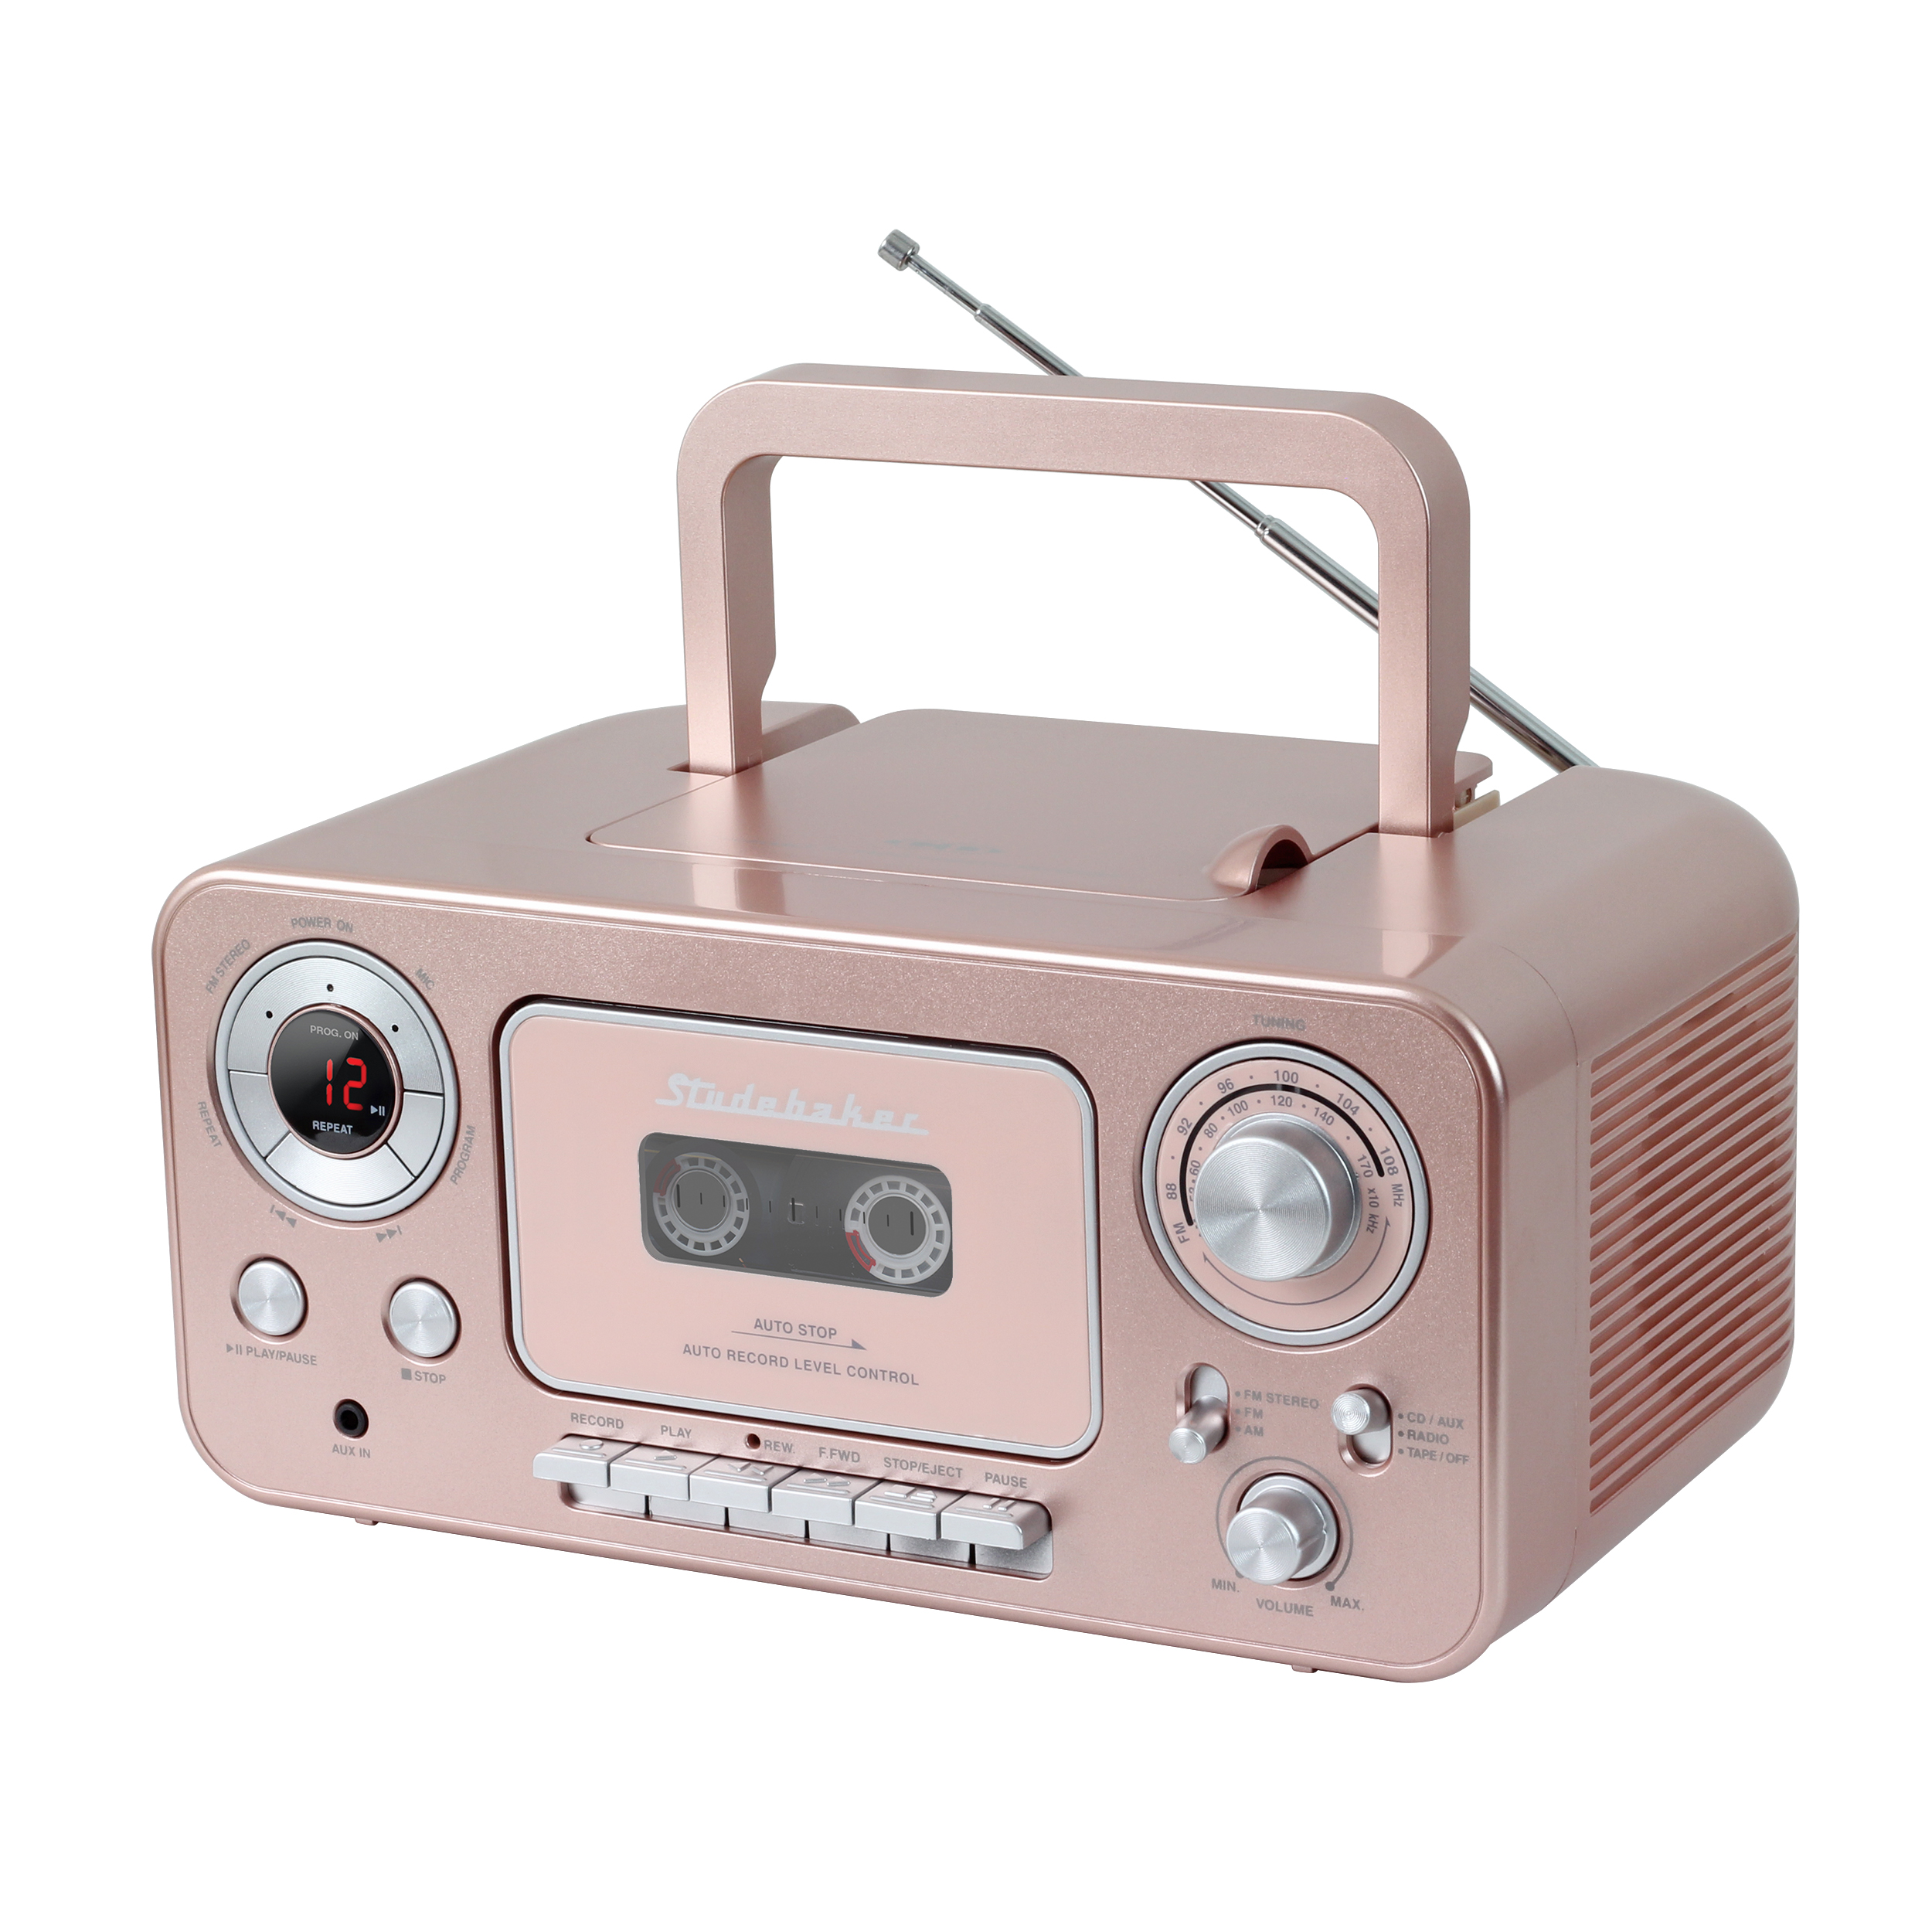 Portable Stereo CD Player with AM/FM Radio and Cassette Player/Recorder - image 1 of 4